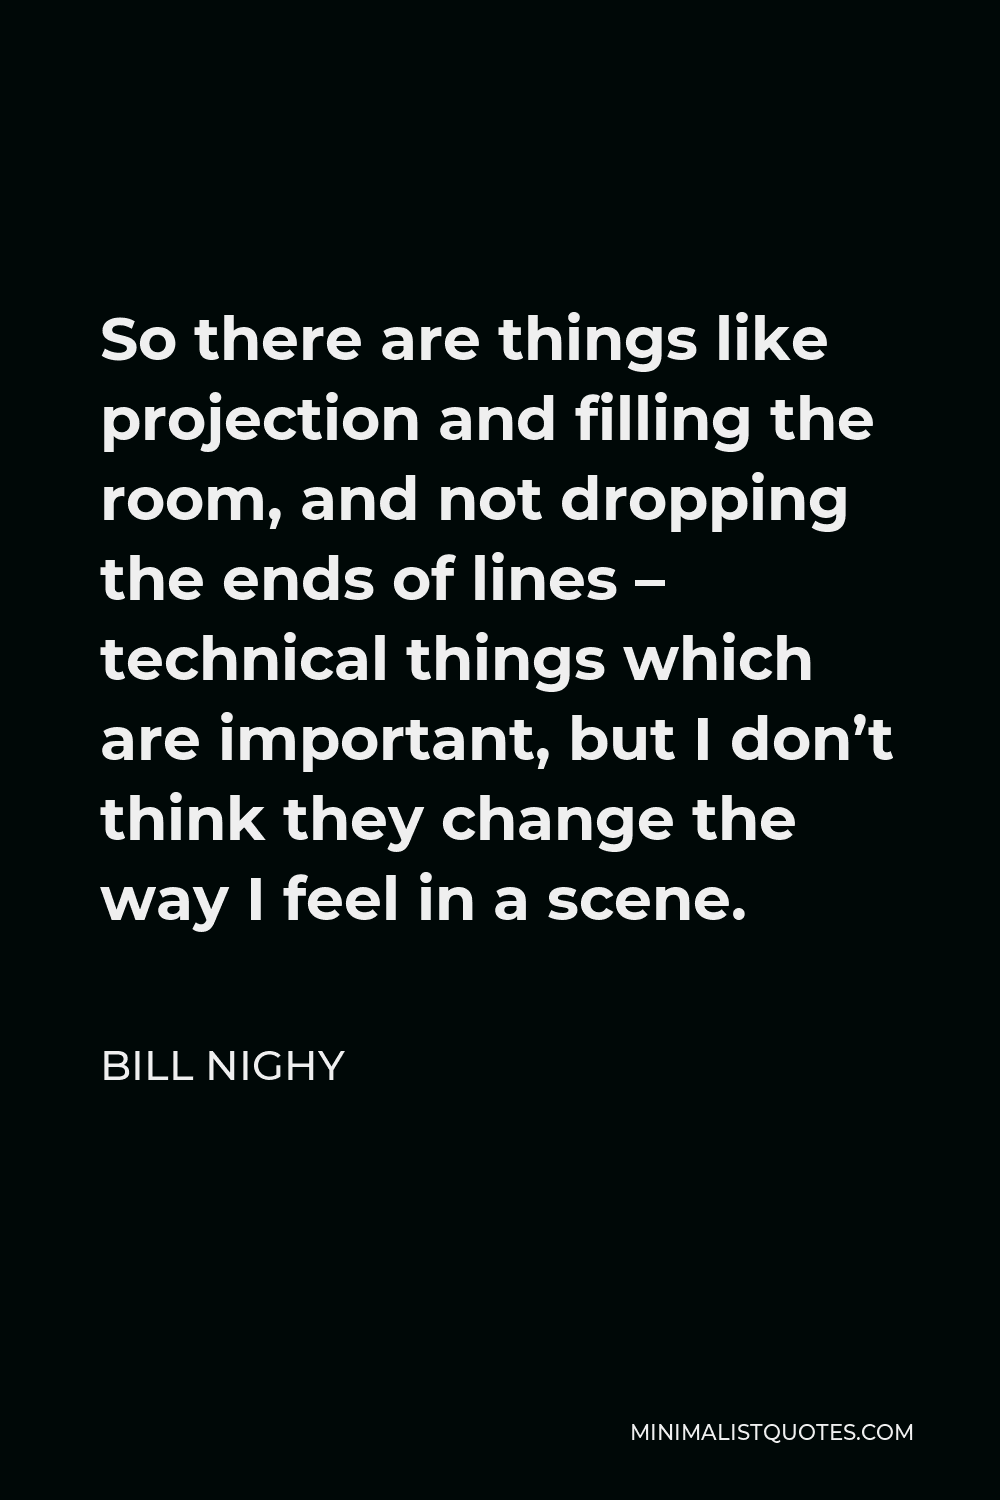 Bill Nighy Quote - So there are things like projection and filling the room, and not dropping the ends of lines – technical things which are important, but I don’t think they change the way I feel in a scene.